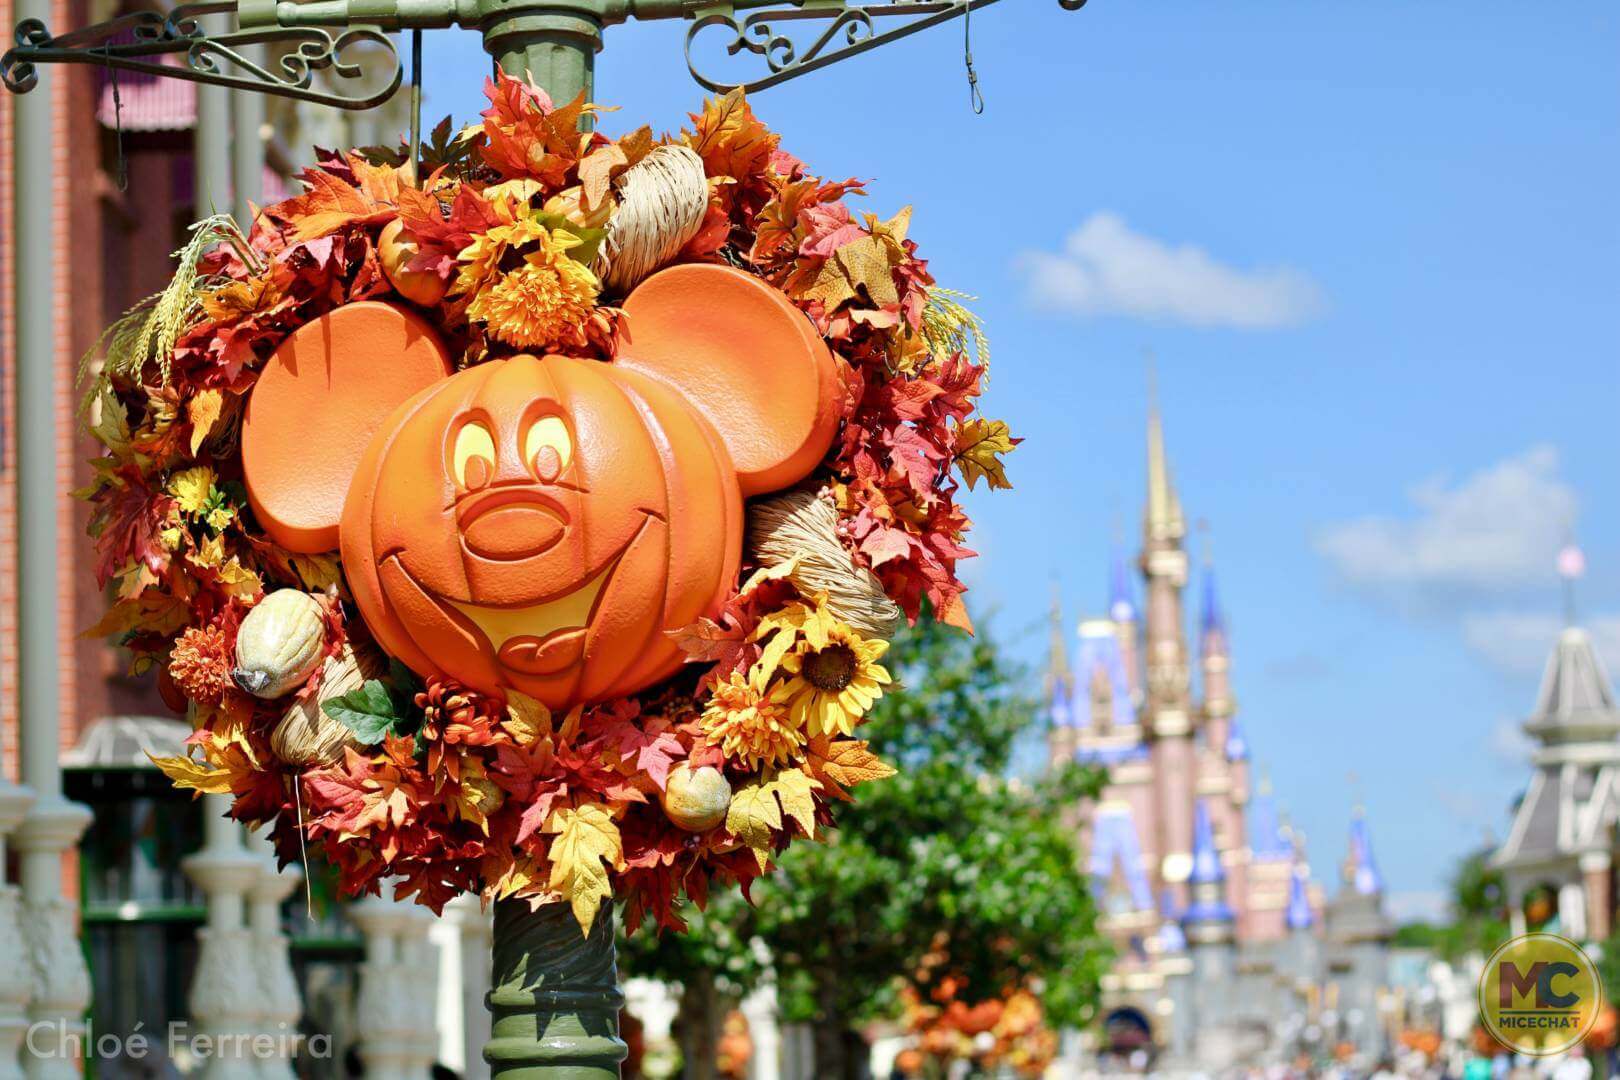 , Walt Disney World Scares Up NEW After Hours BOO BASH For Halloween 2021